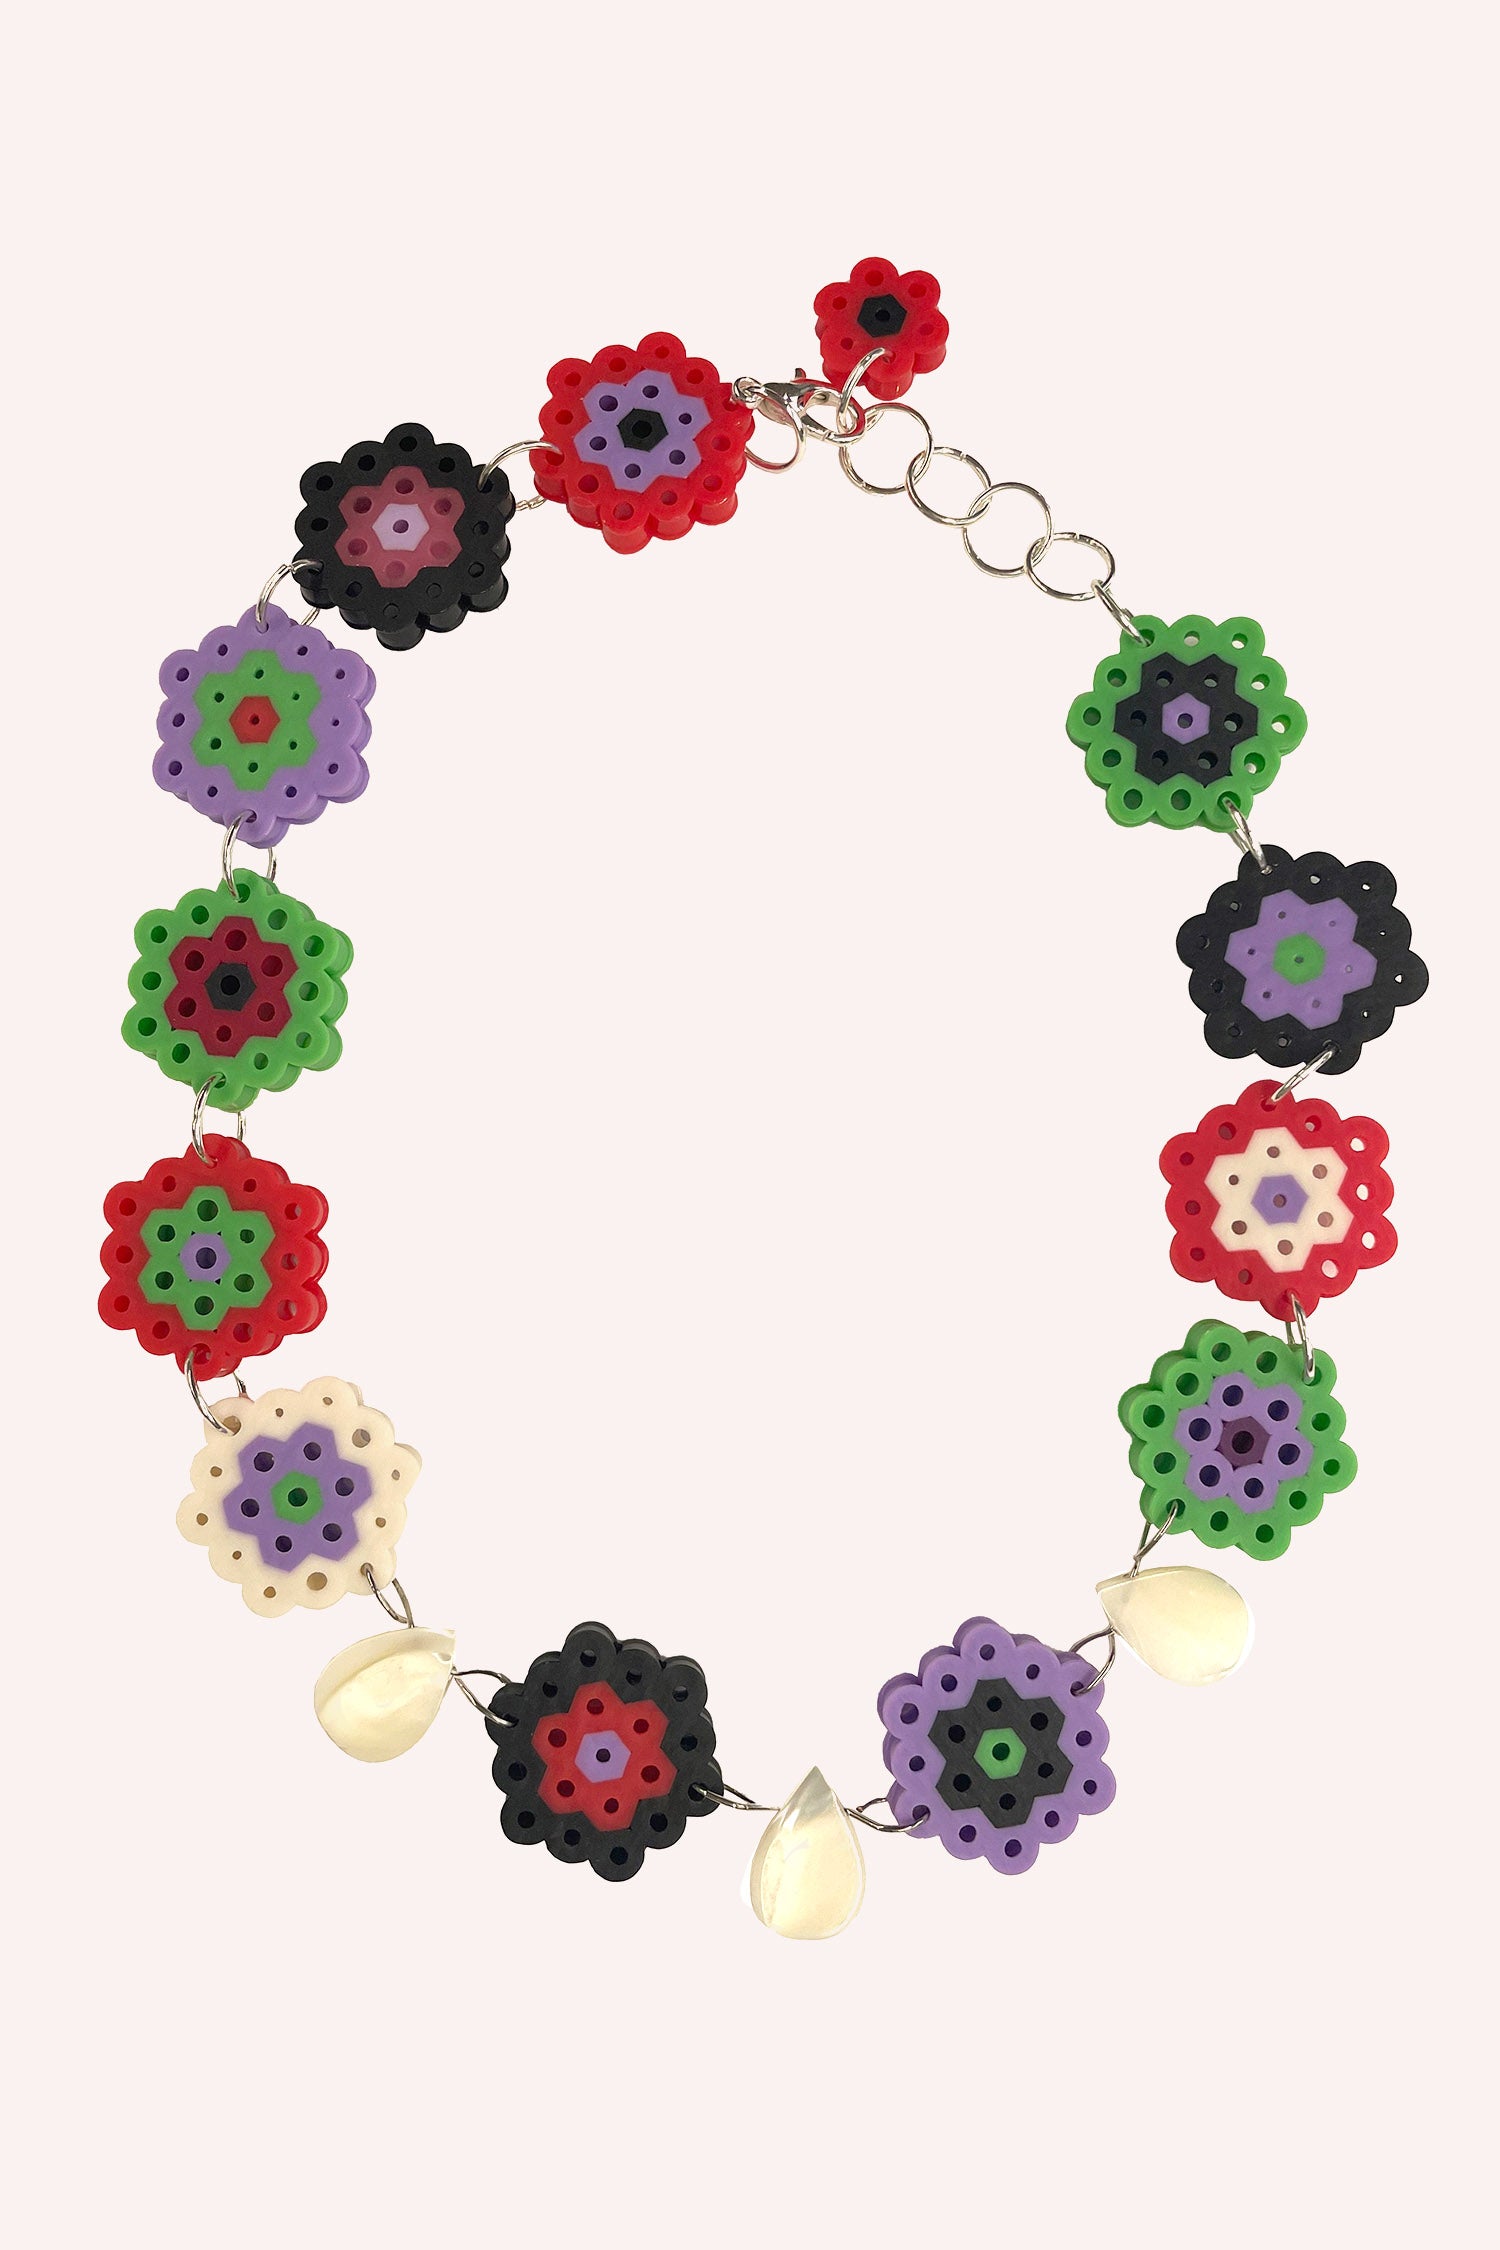 Daisy Chain Shell Choker Red features 14 daisy-like beads linked together with a chain, 3 shells in front